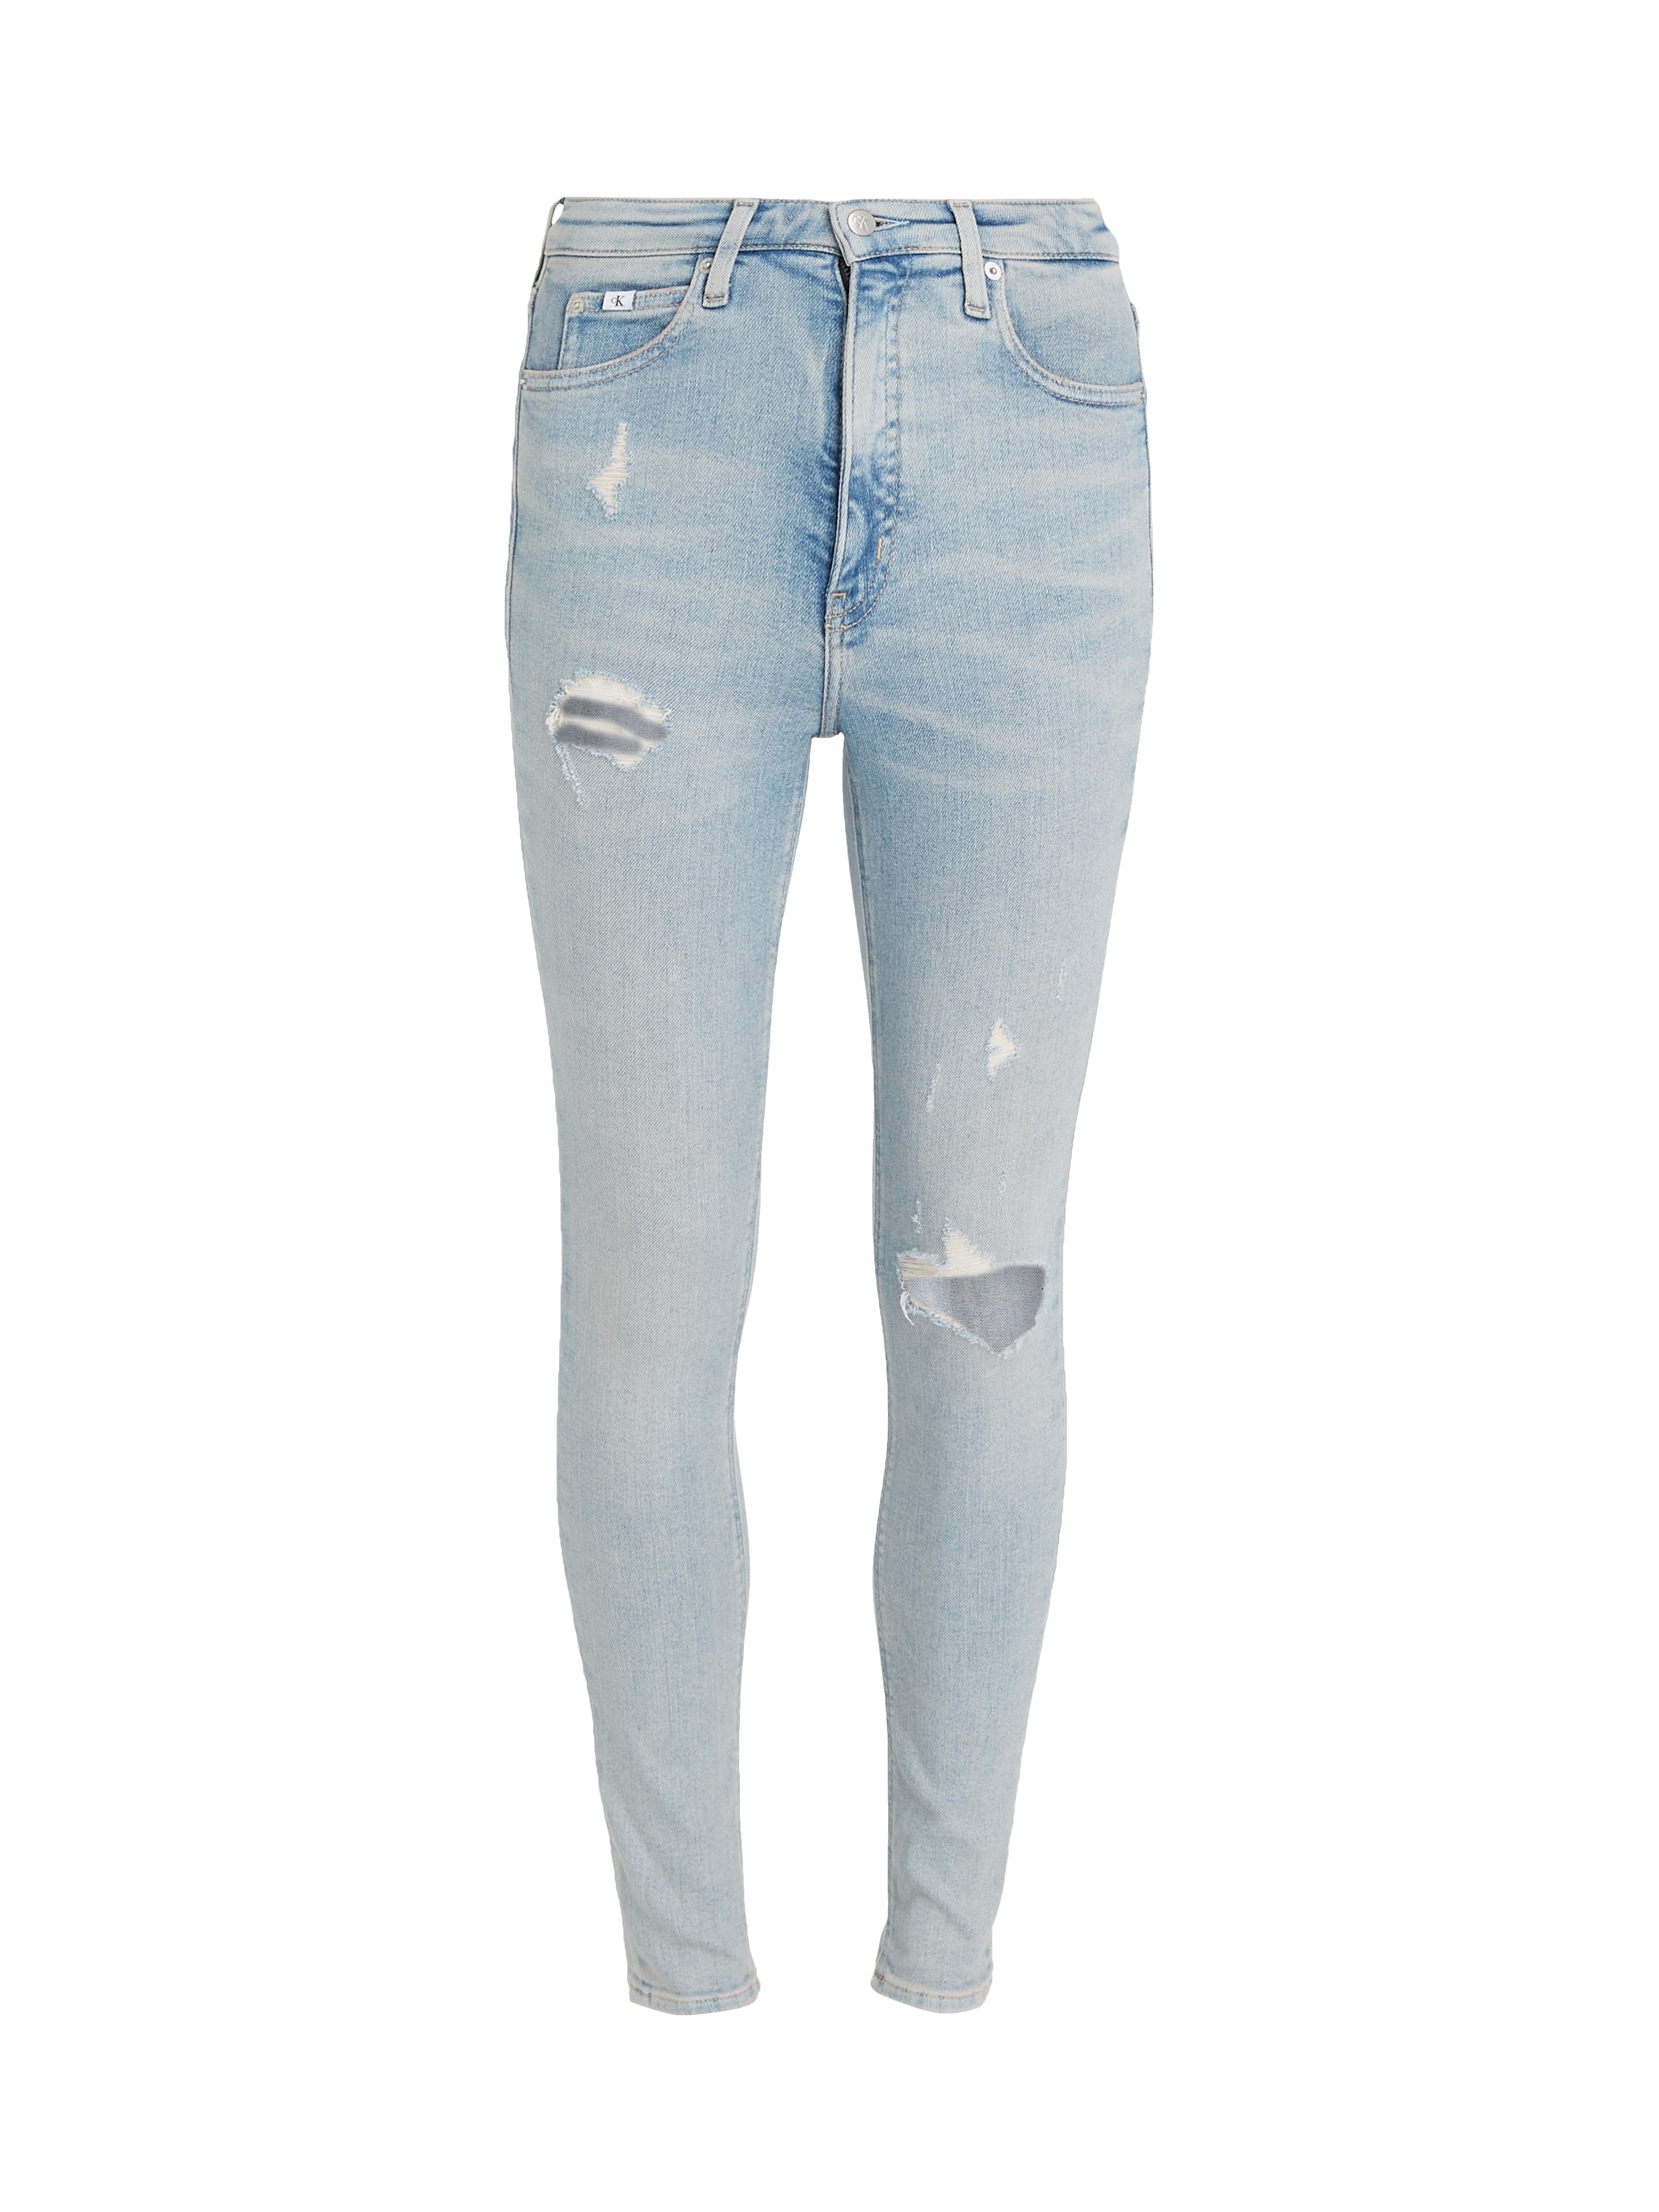 Jeans Skinny-fit-Jeans SKINNY«, im Calvin kaufen RISE Klein »HIGH OTTO bei 5-Pocket-Style